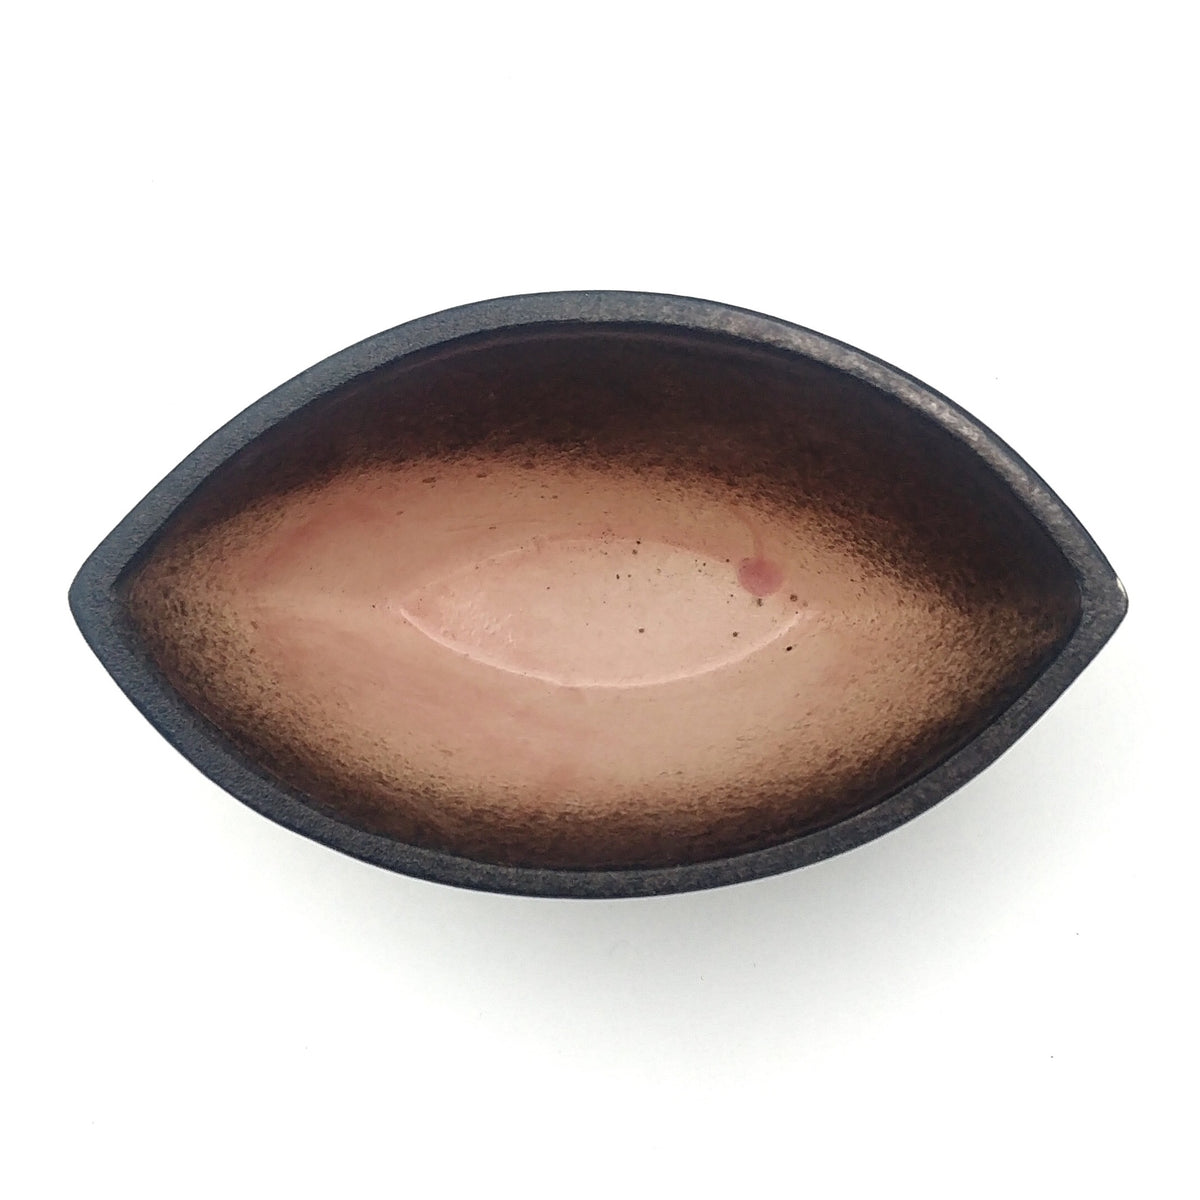 Kaolin-gudnyhaf-boat. Color pinkk on the inside and black on the outside.